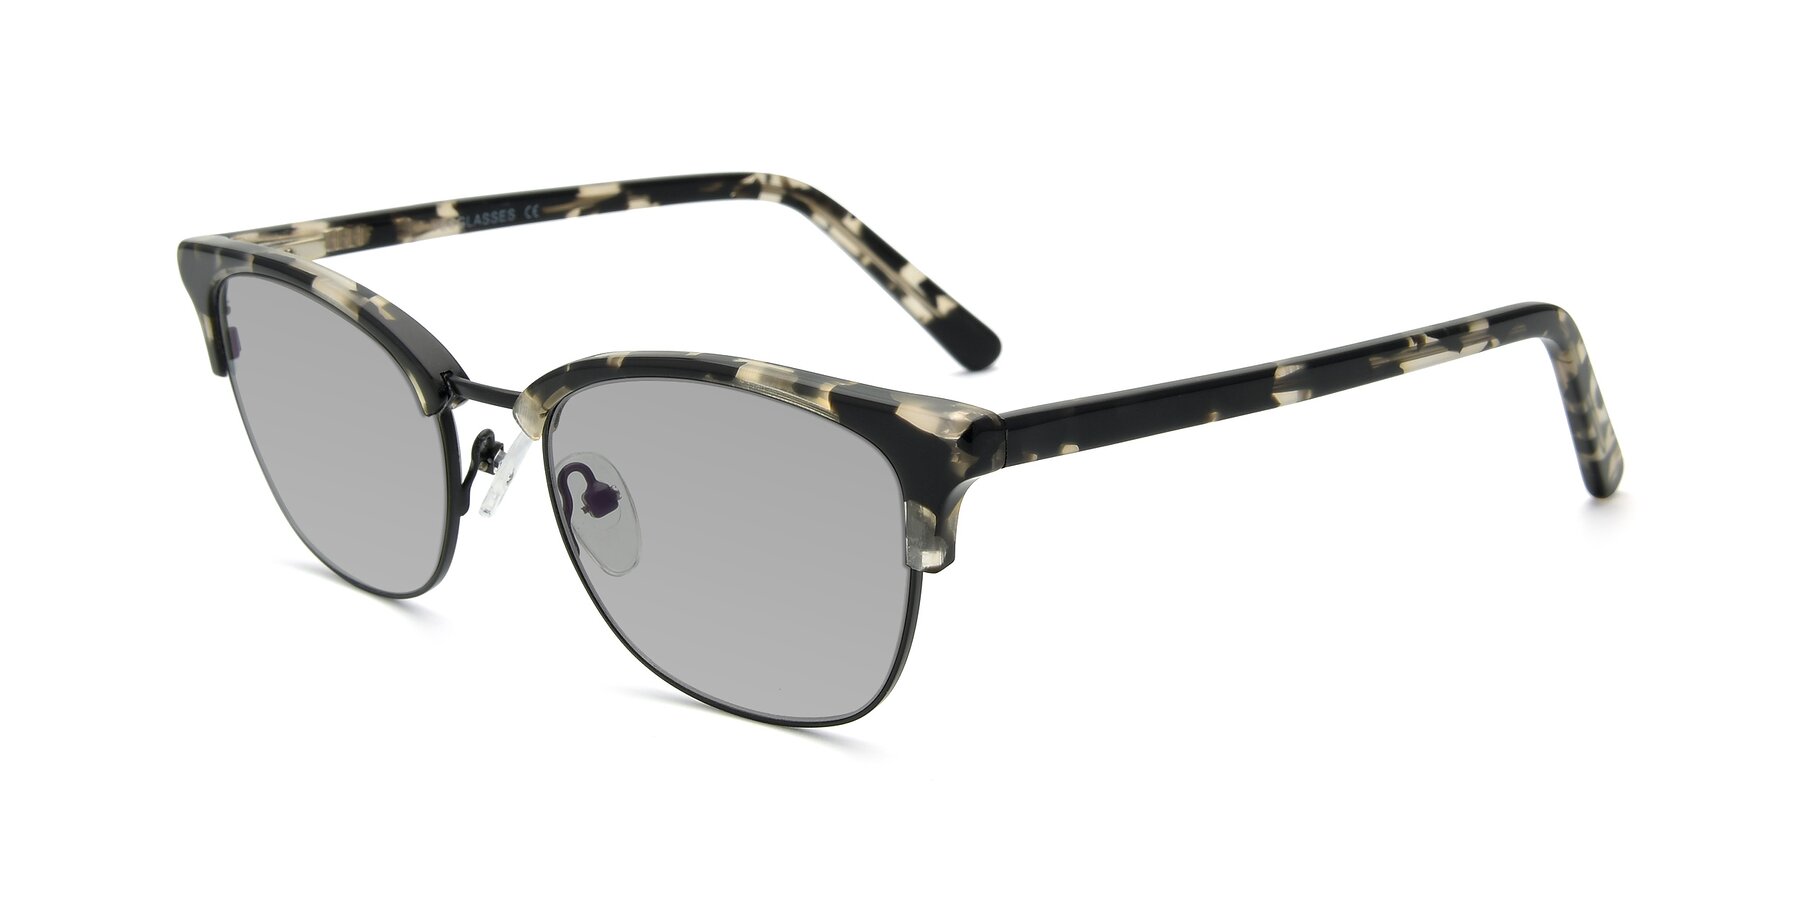 Angle of 17463 in Black-Tortoise with Light Gray Tinted Lenses